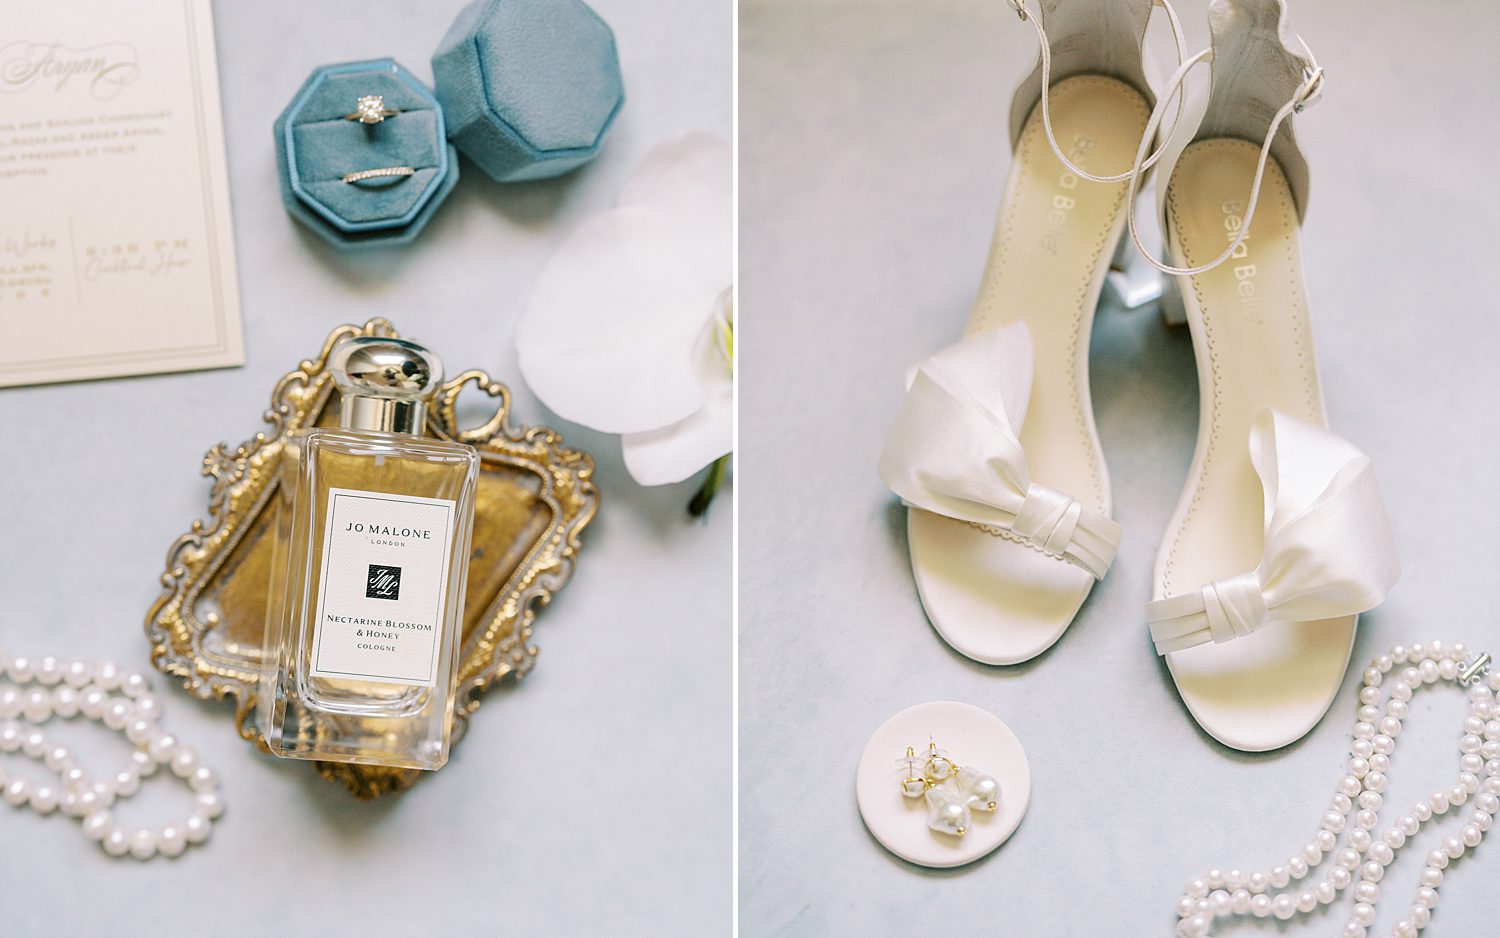 bride's shoes, perfume bottle, and ring box for traditional FL wedding day